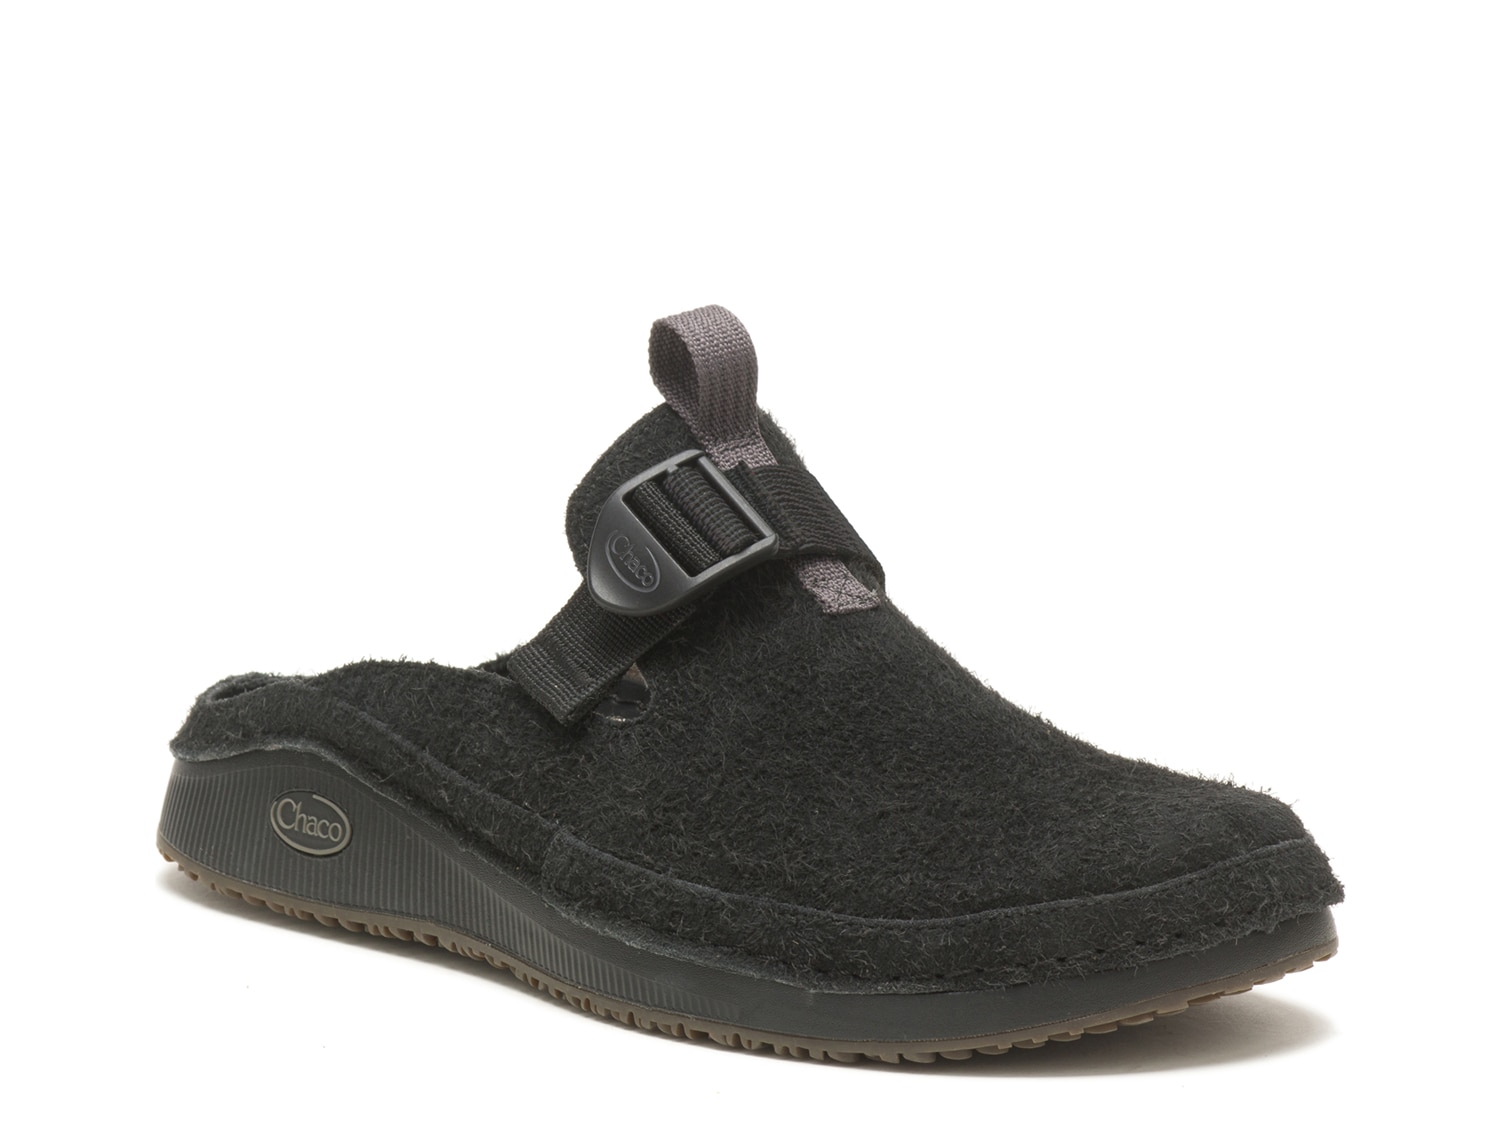 Chaco Paonia Clog - Free Shipping | DSW